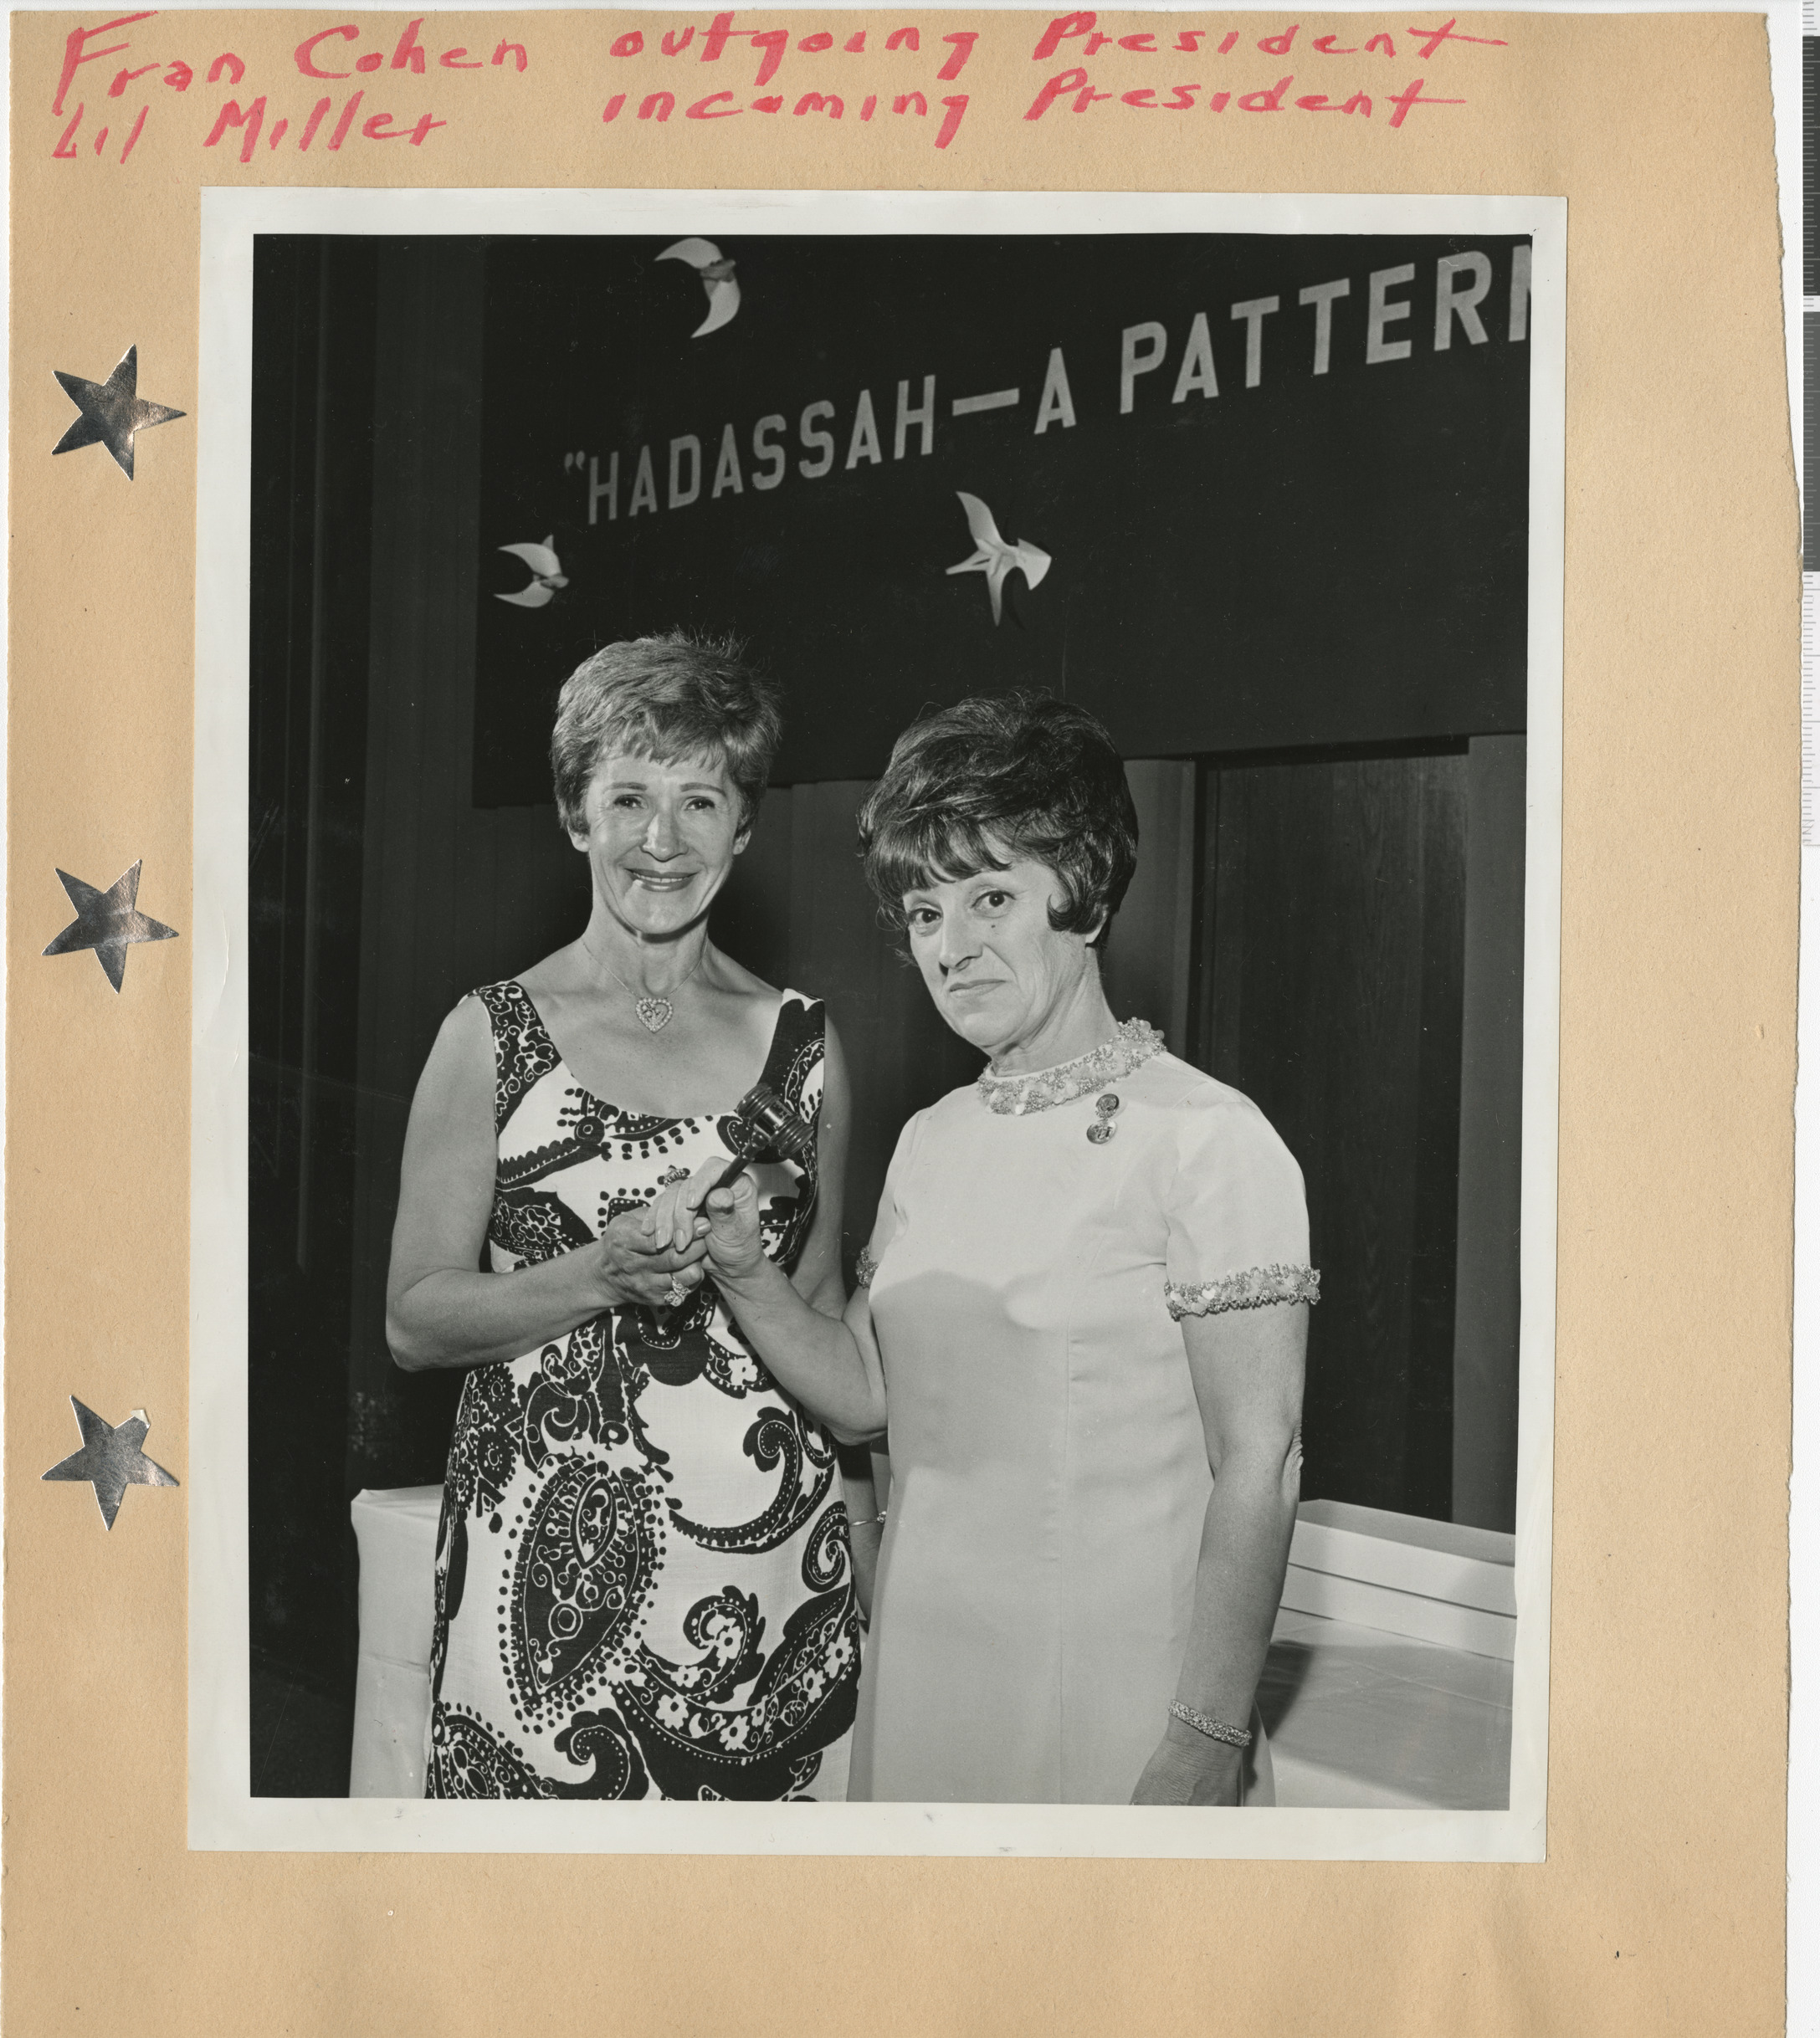 Photograph of Fran Cohen (outgoing president) and Lillian Miller (incoming president), June 1967